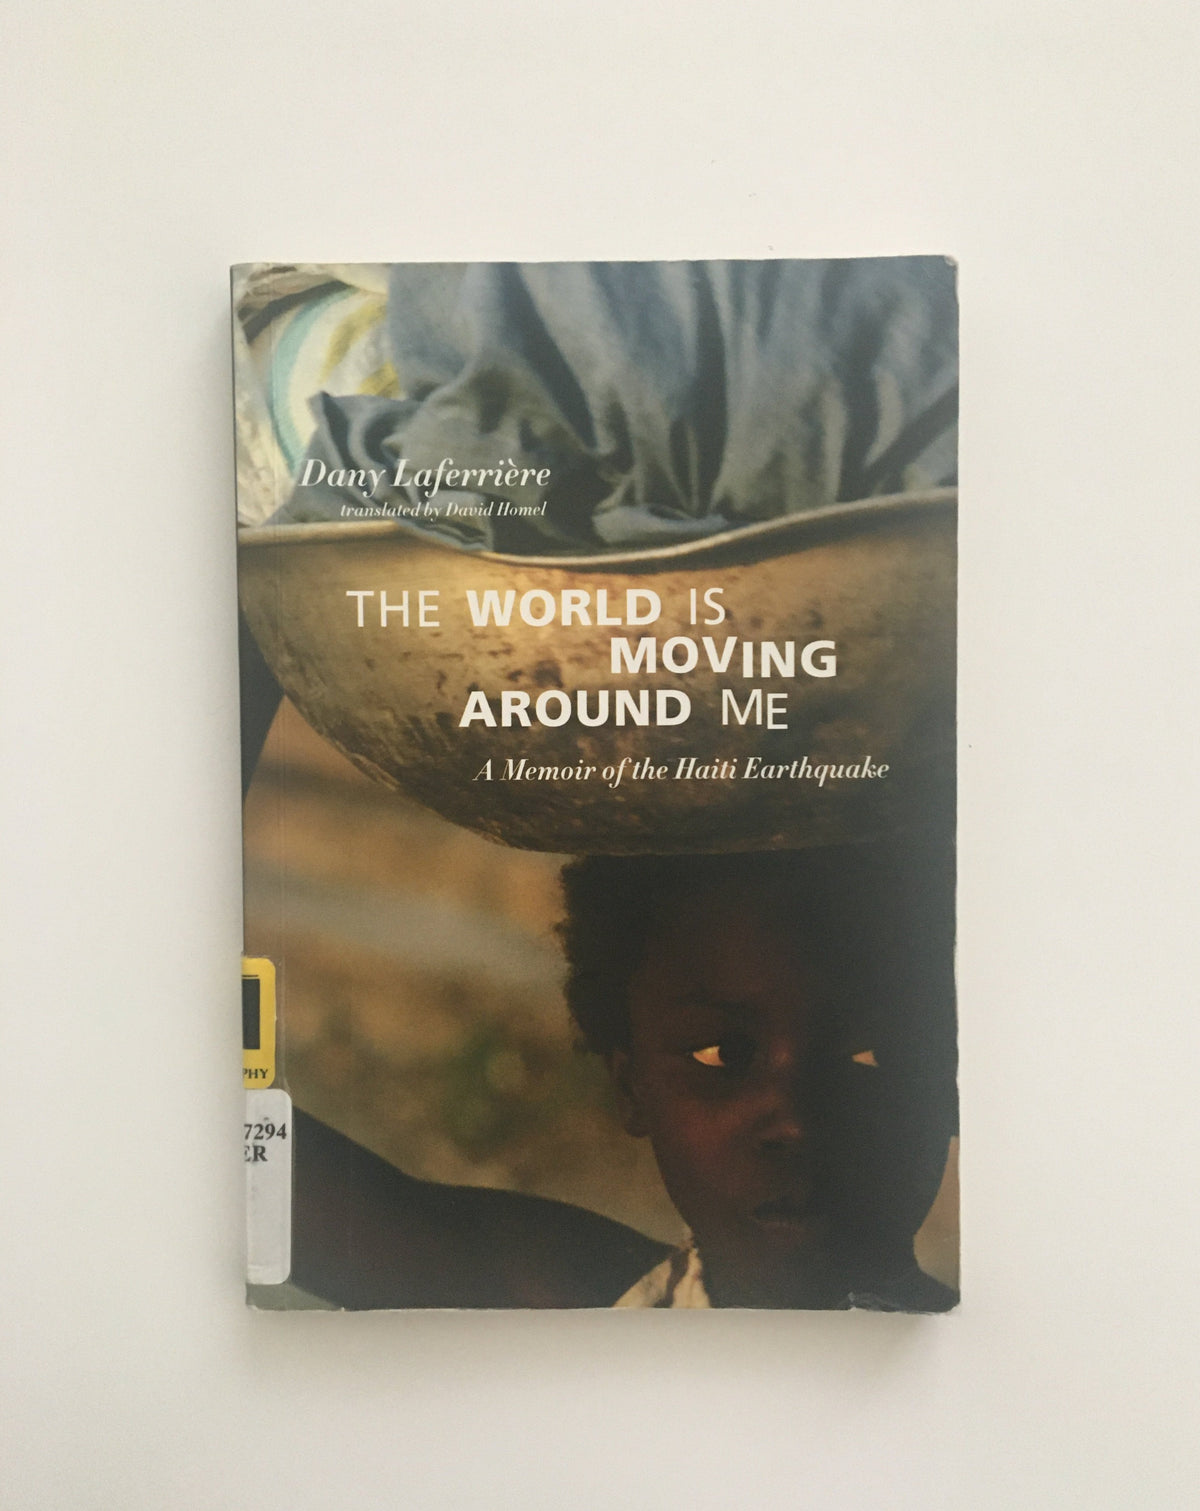 The World is Moving Around Me By Dany Laferriere, book, Ten Dollar Books, Ten Dollar Books